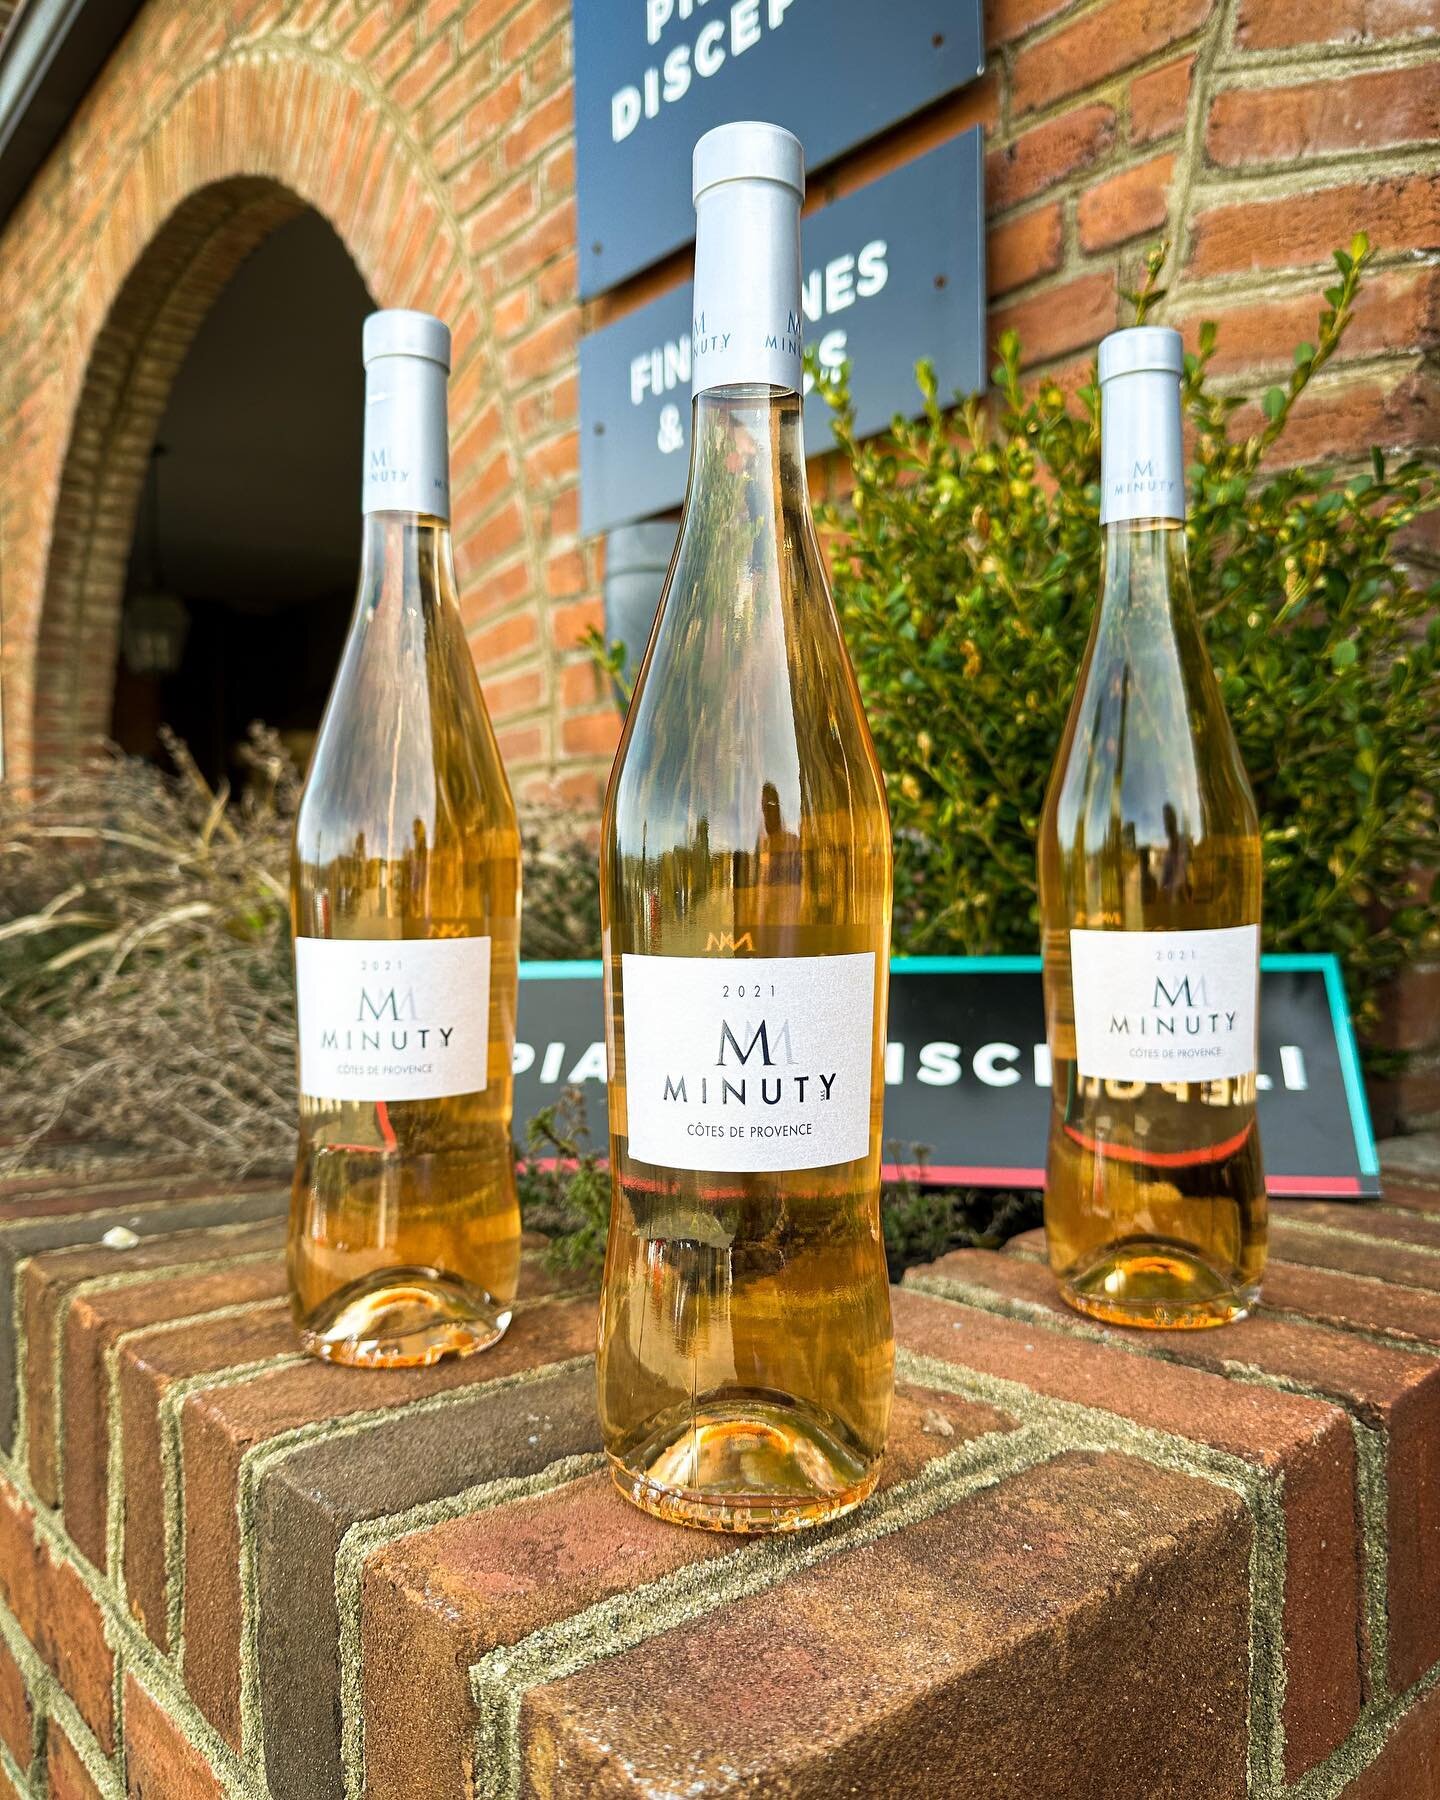 Look what&rsquo;s on sale!! Our best selling ros&eacute; dropped in price just in time for spring!! Come get it while supplies last. #rose #wine #winestore #spring